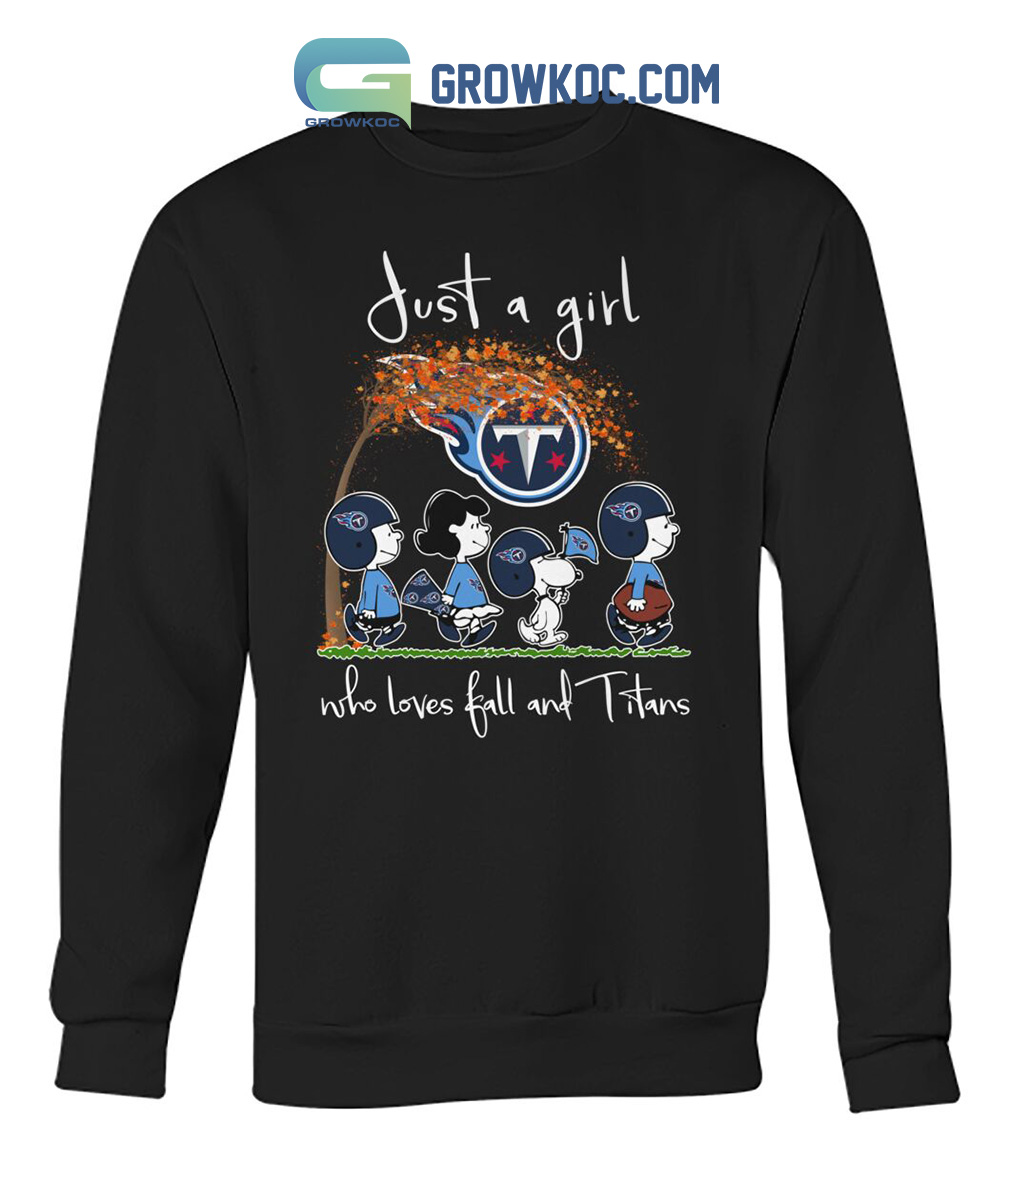 Just A Girl Who Loves Fall And Titans Shirt Hoodie Sweater